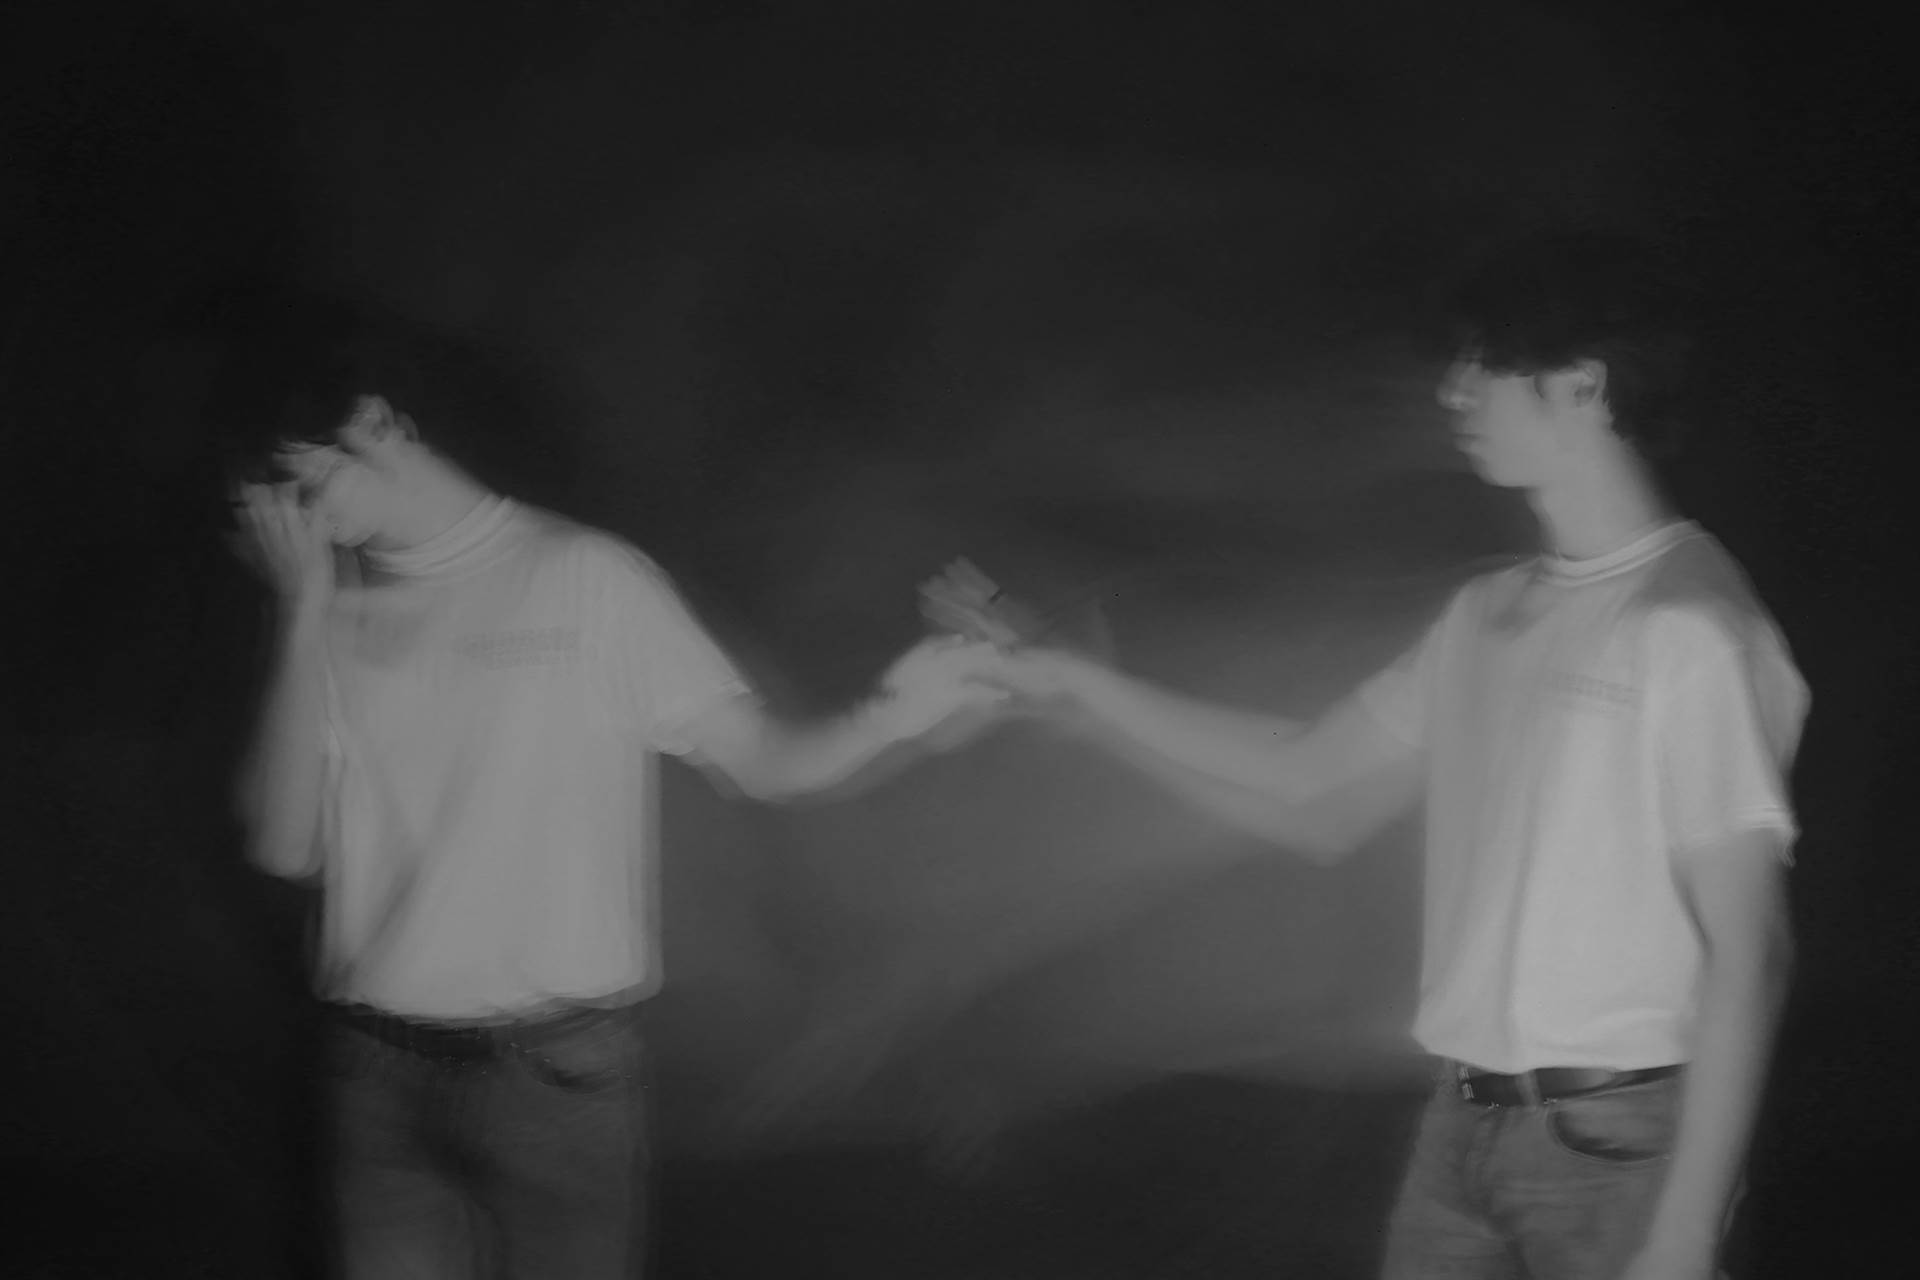 Black and white photo of 2 teams holding hands